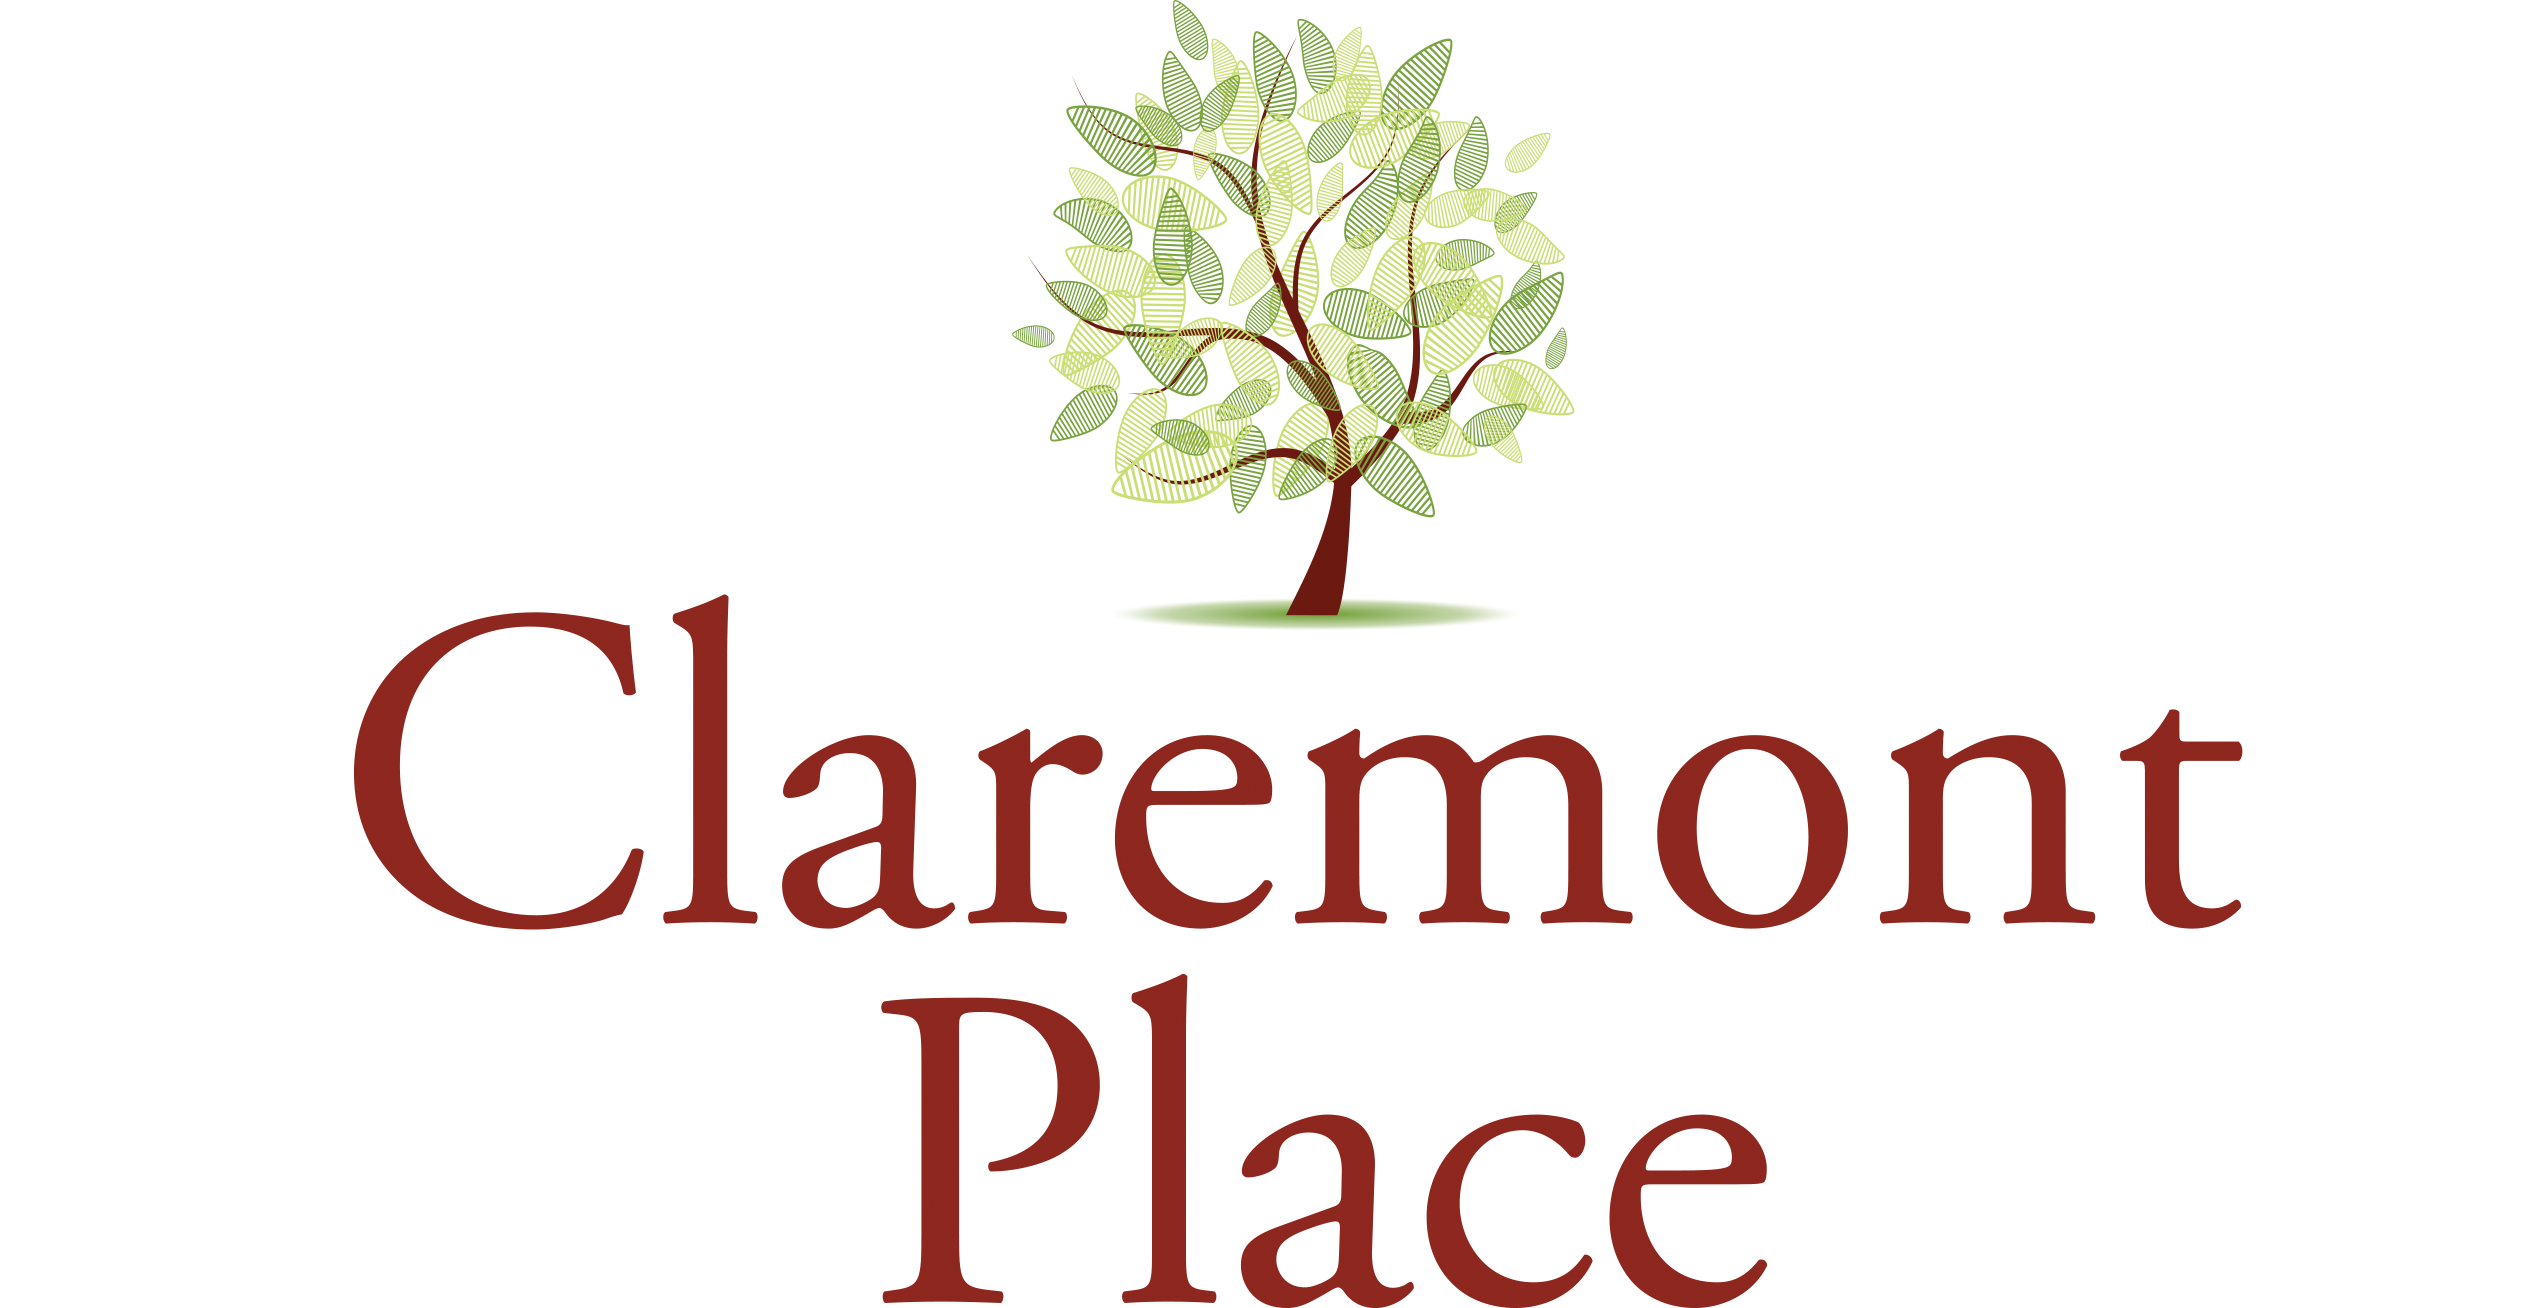 3. Claremont Place (Silver)